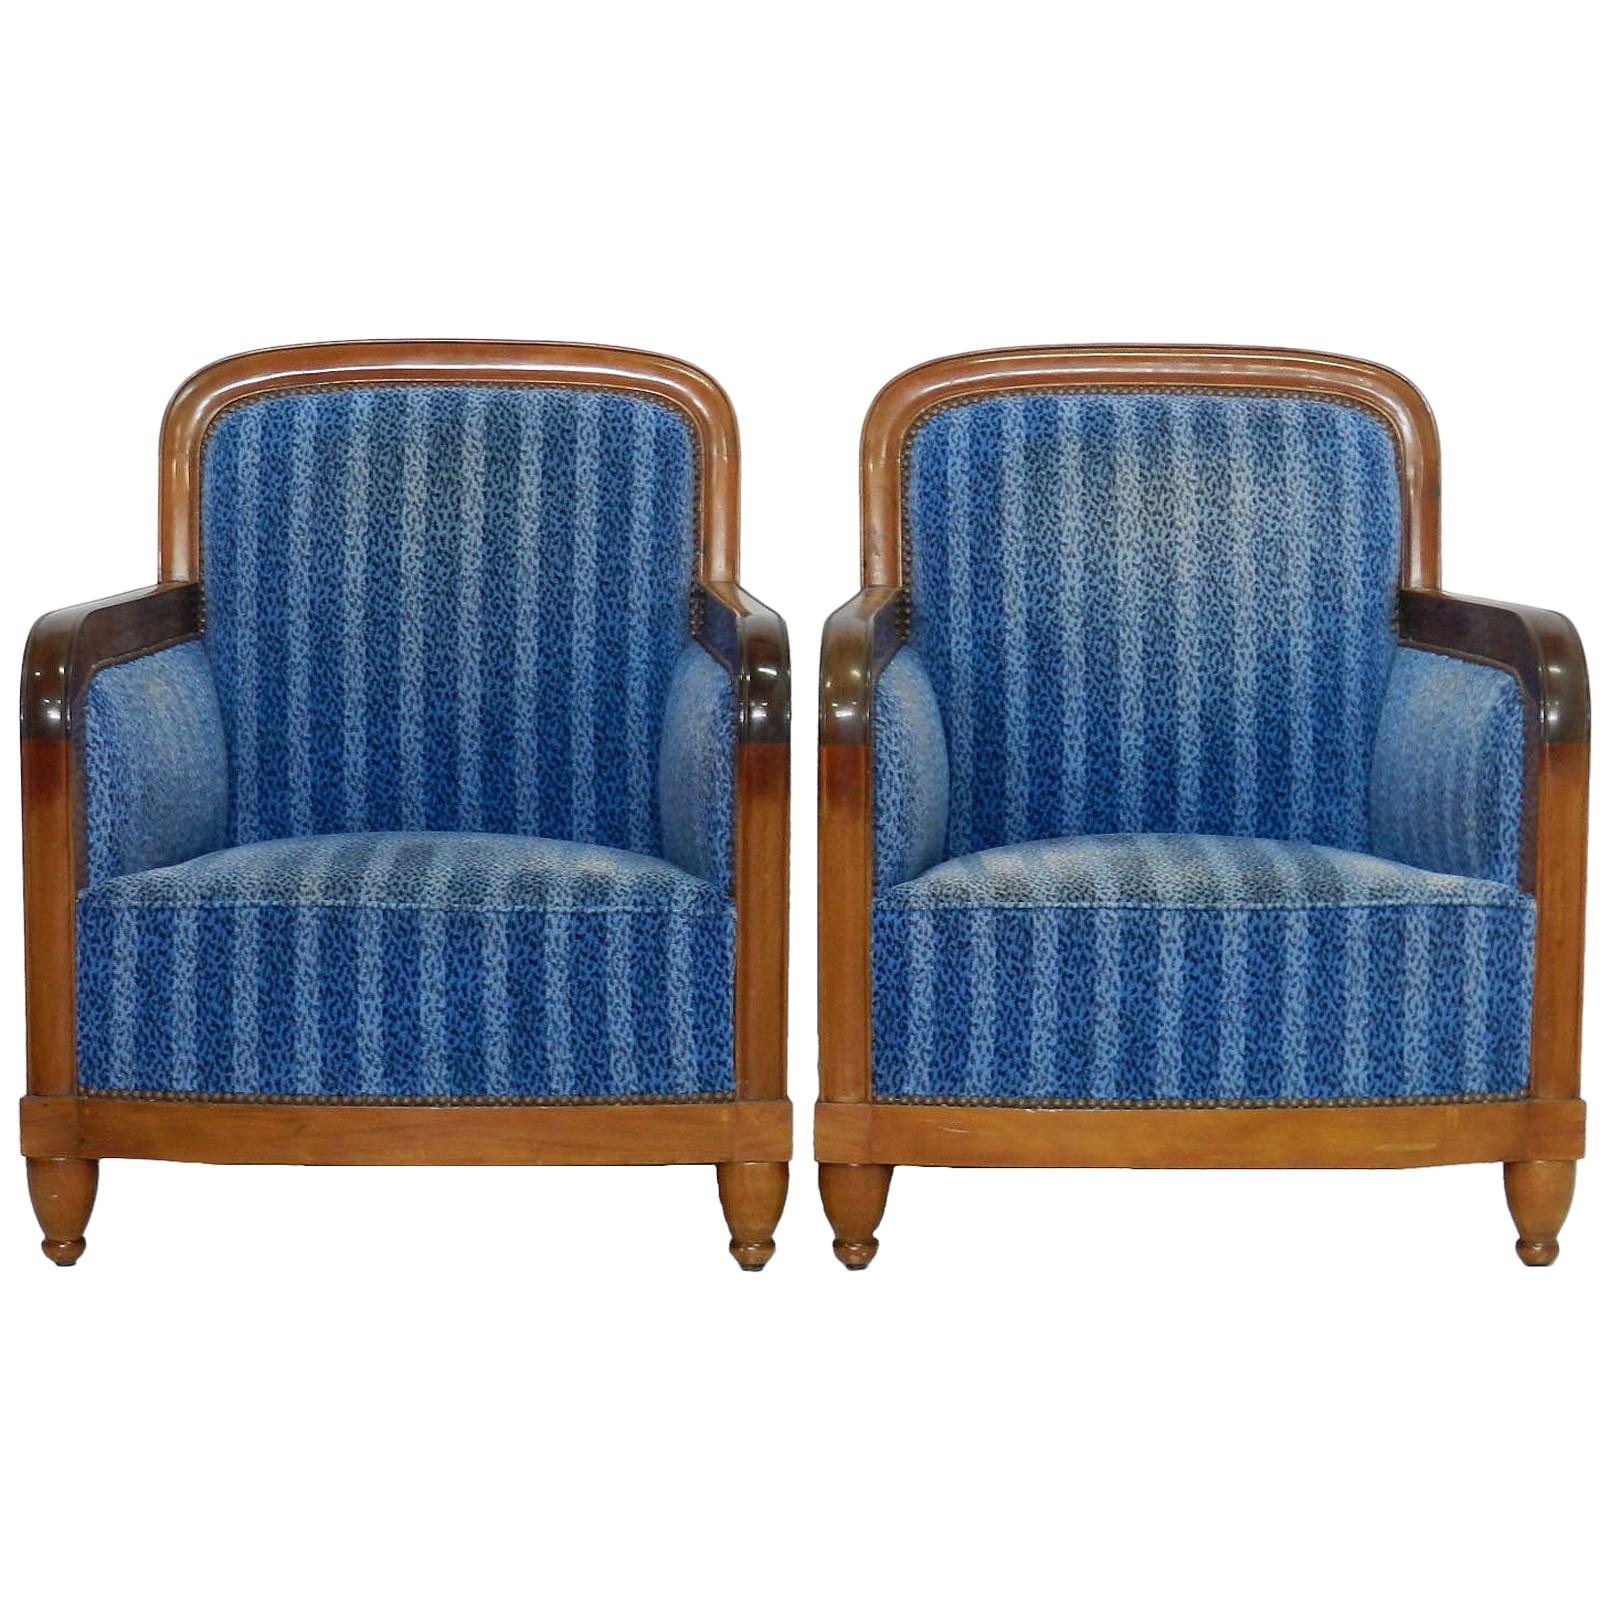 Pair of Art Deco Club Chairs French Two Armchairs, circa 1930